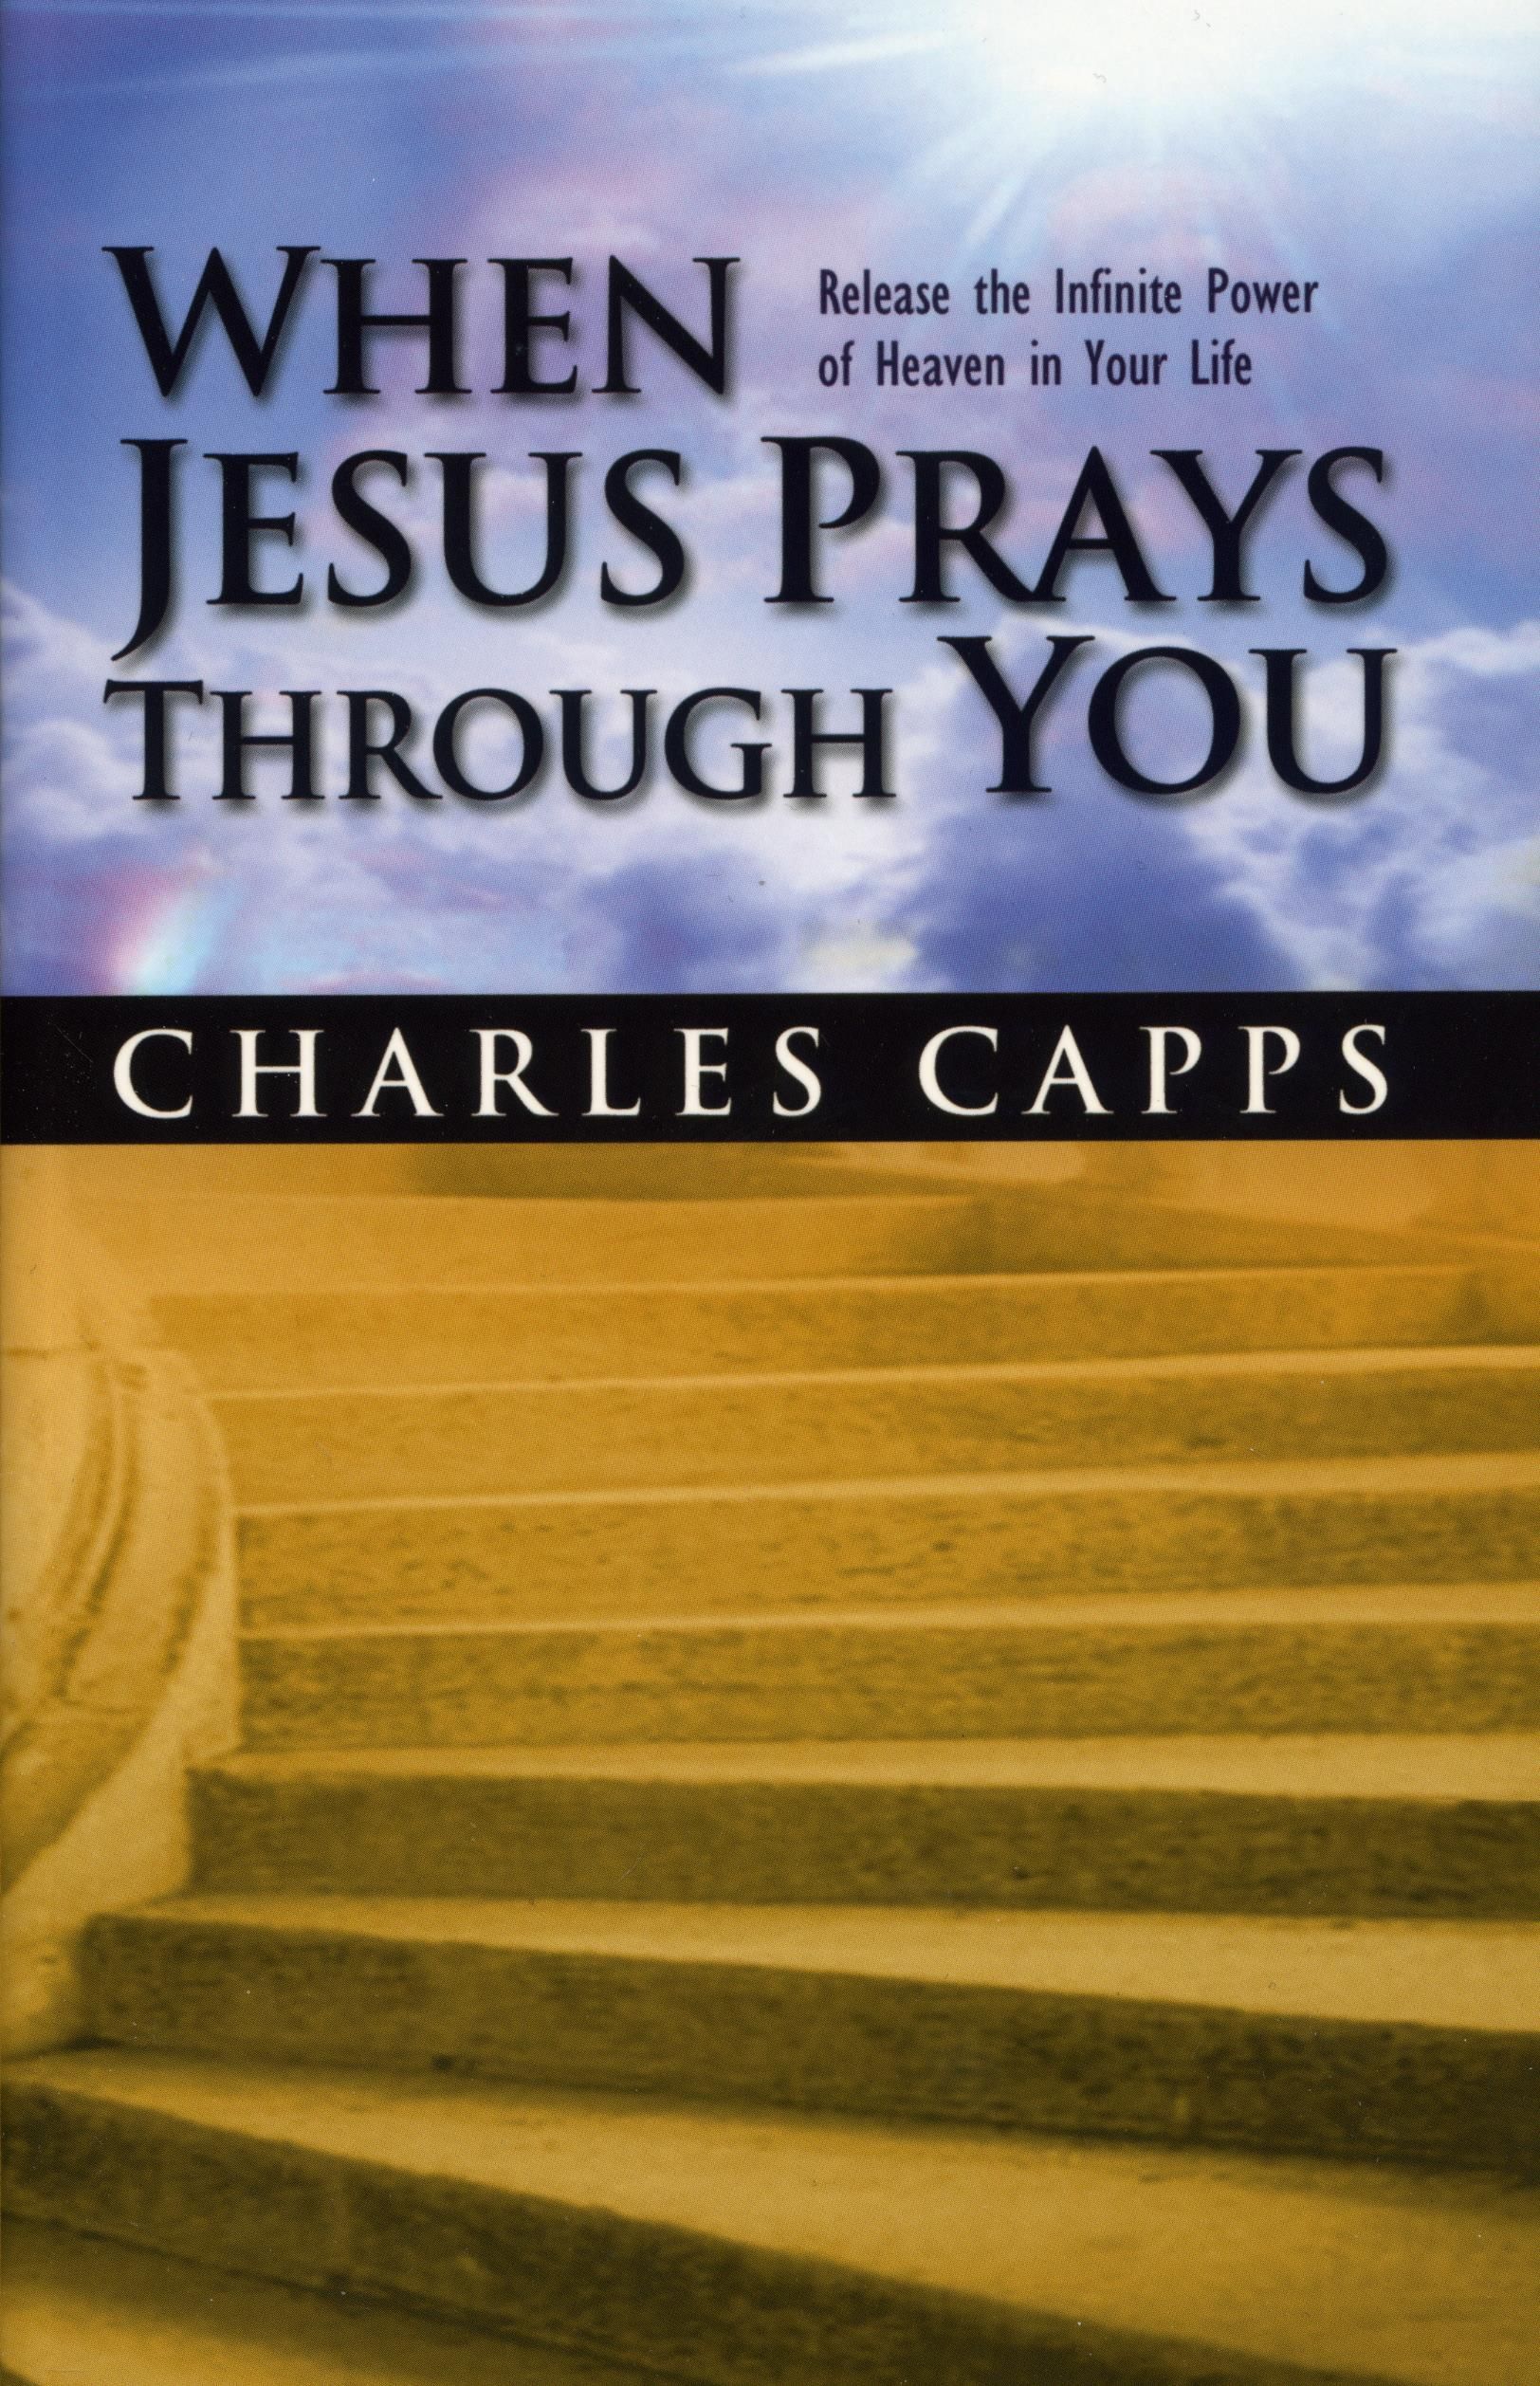 Charles Capps: When Jesus prays through you